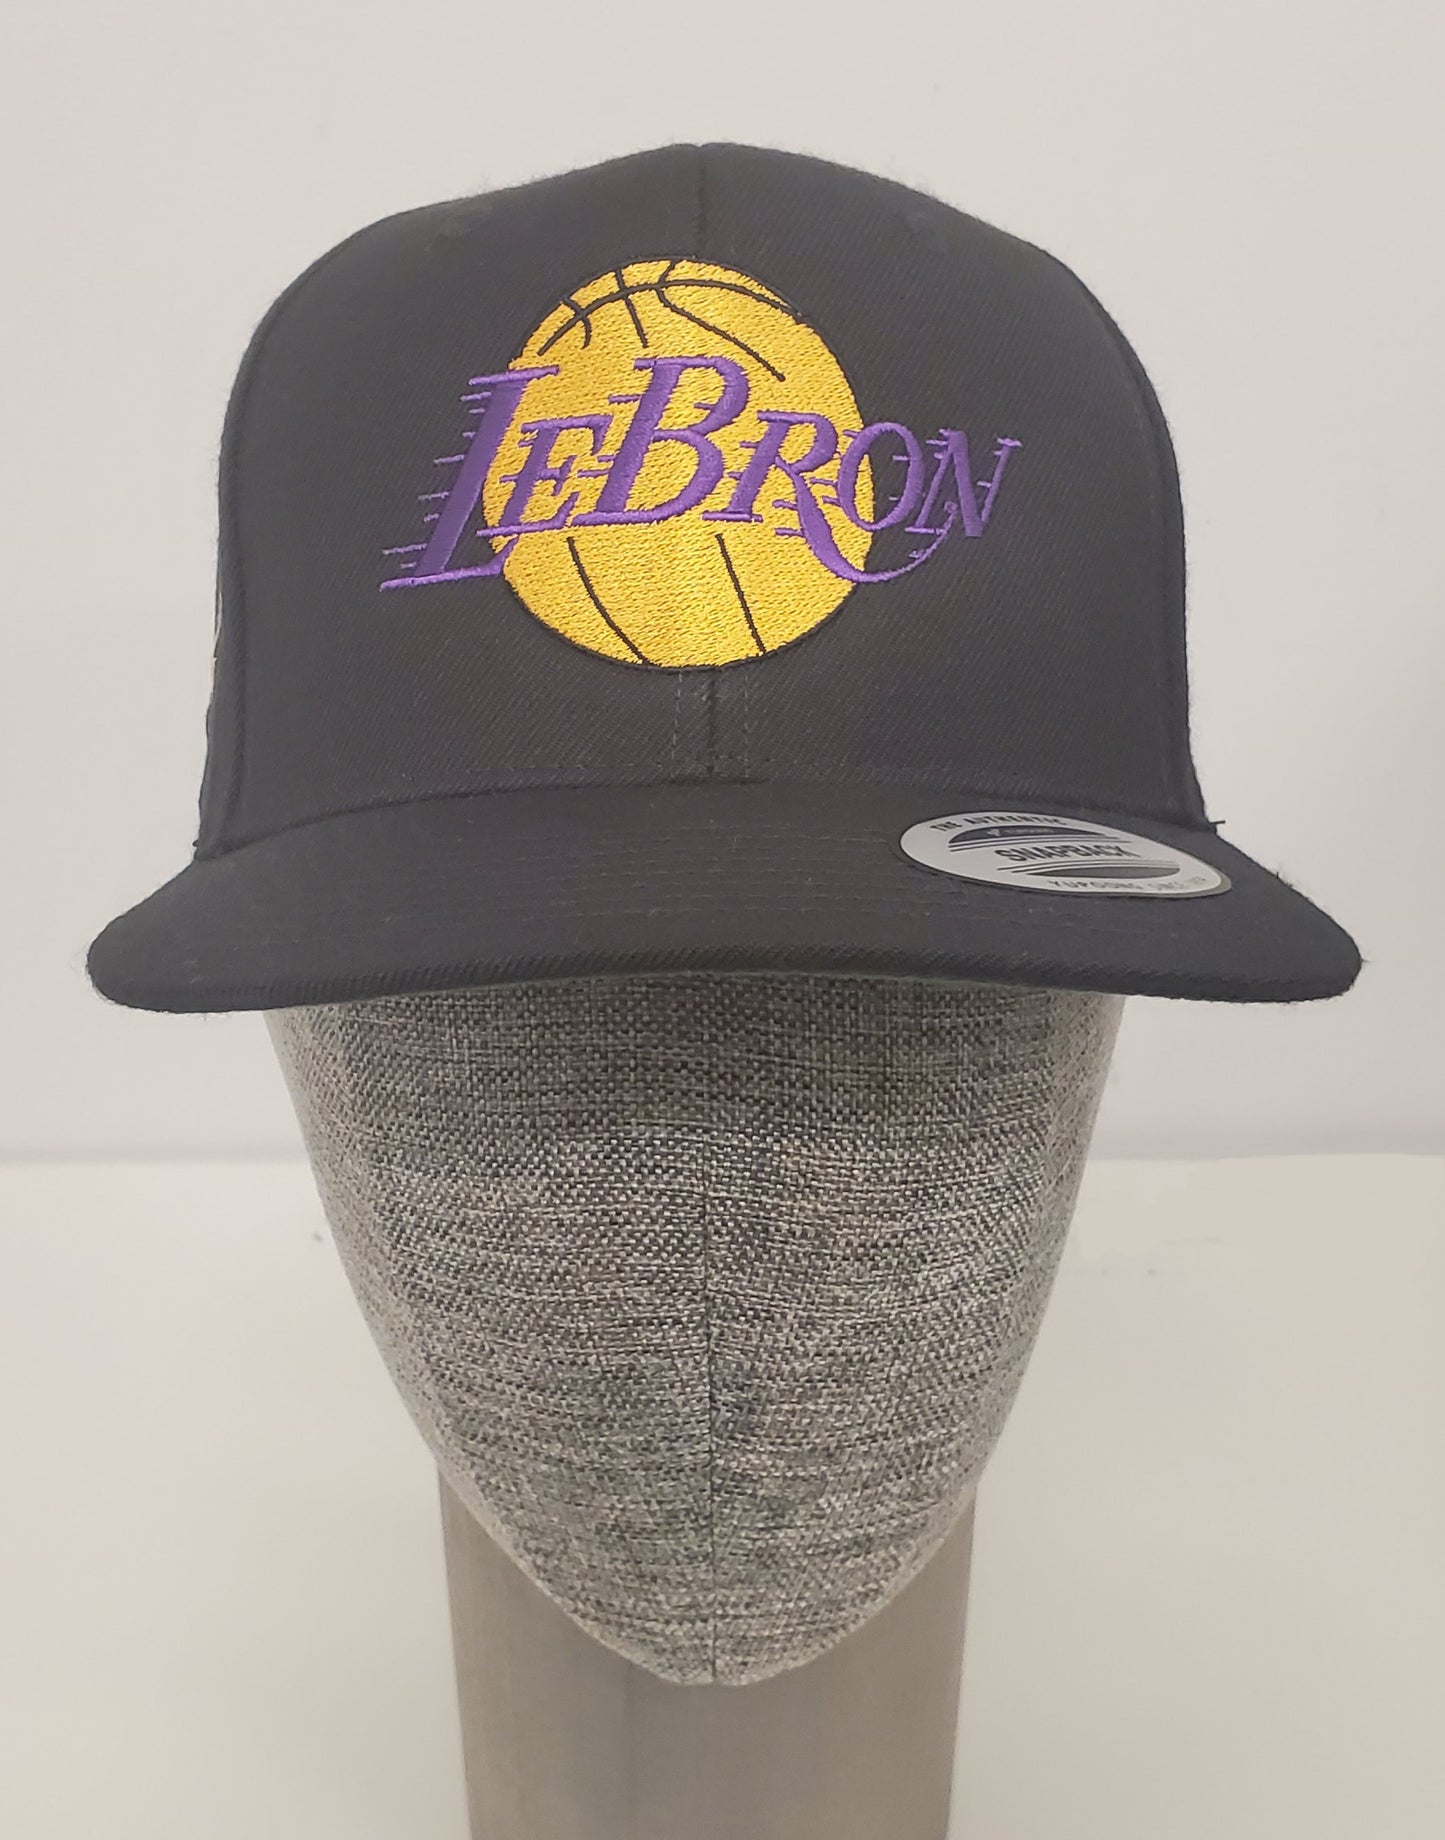 Limited Edition LeBron James "RESPECT" Hat (With Trophies)